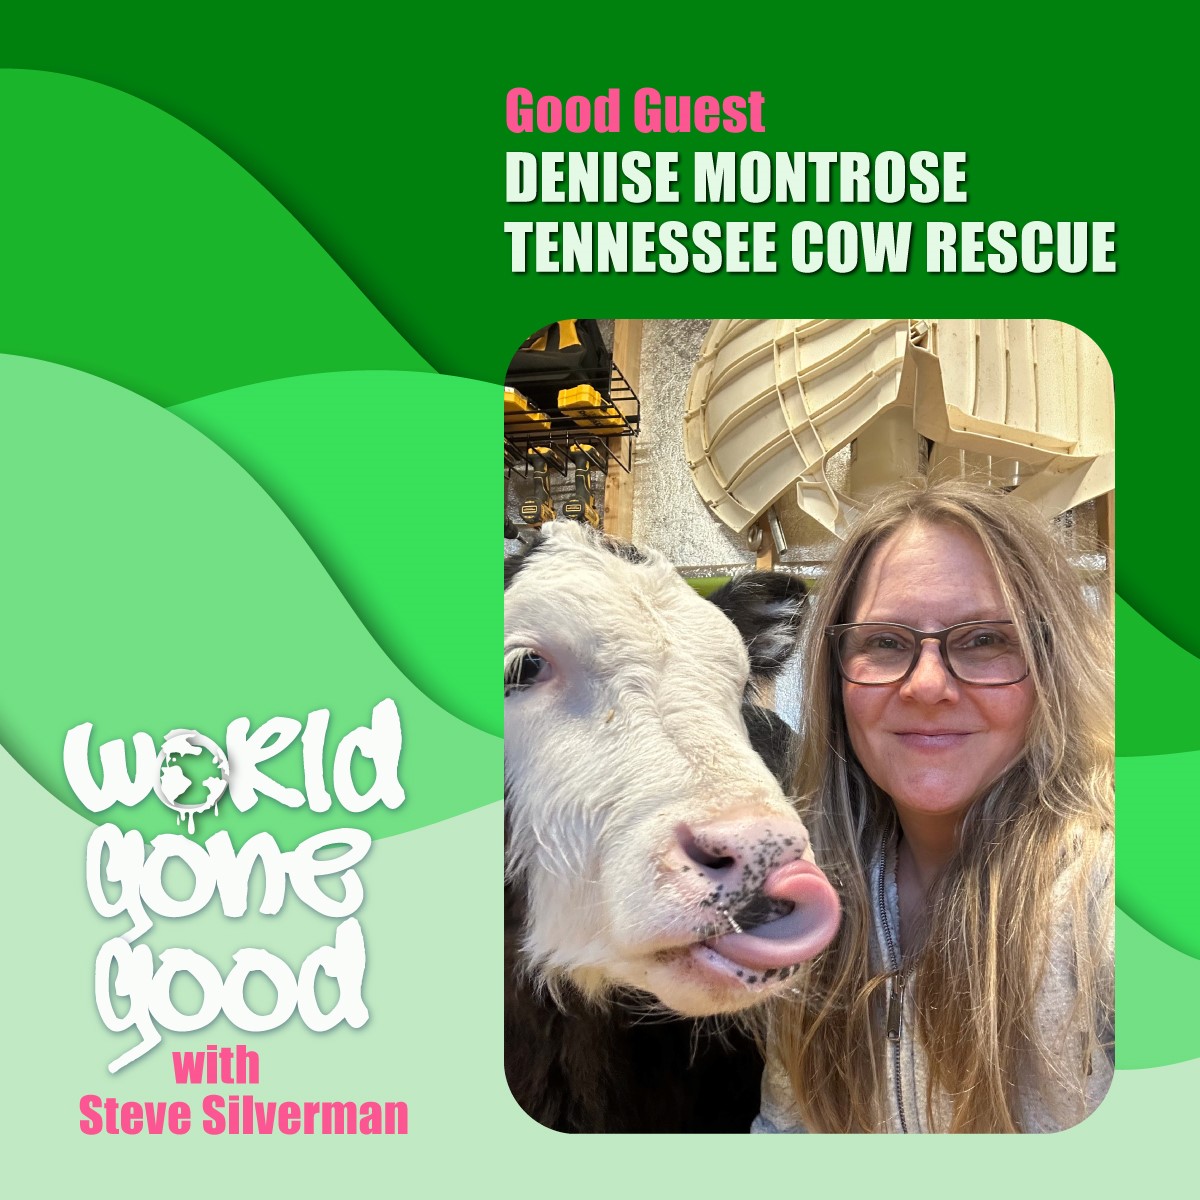 Tennessee Cow Rescue Gone Good